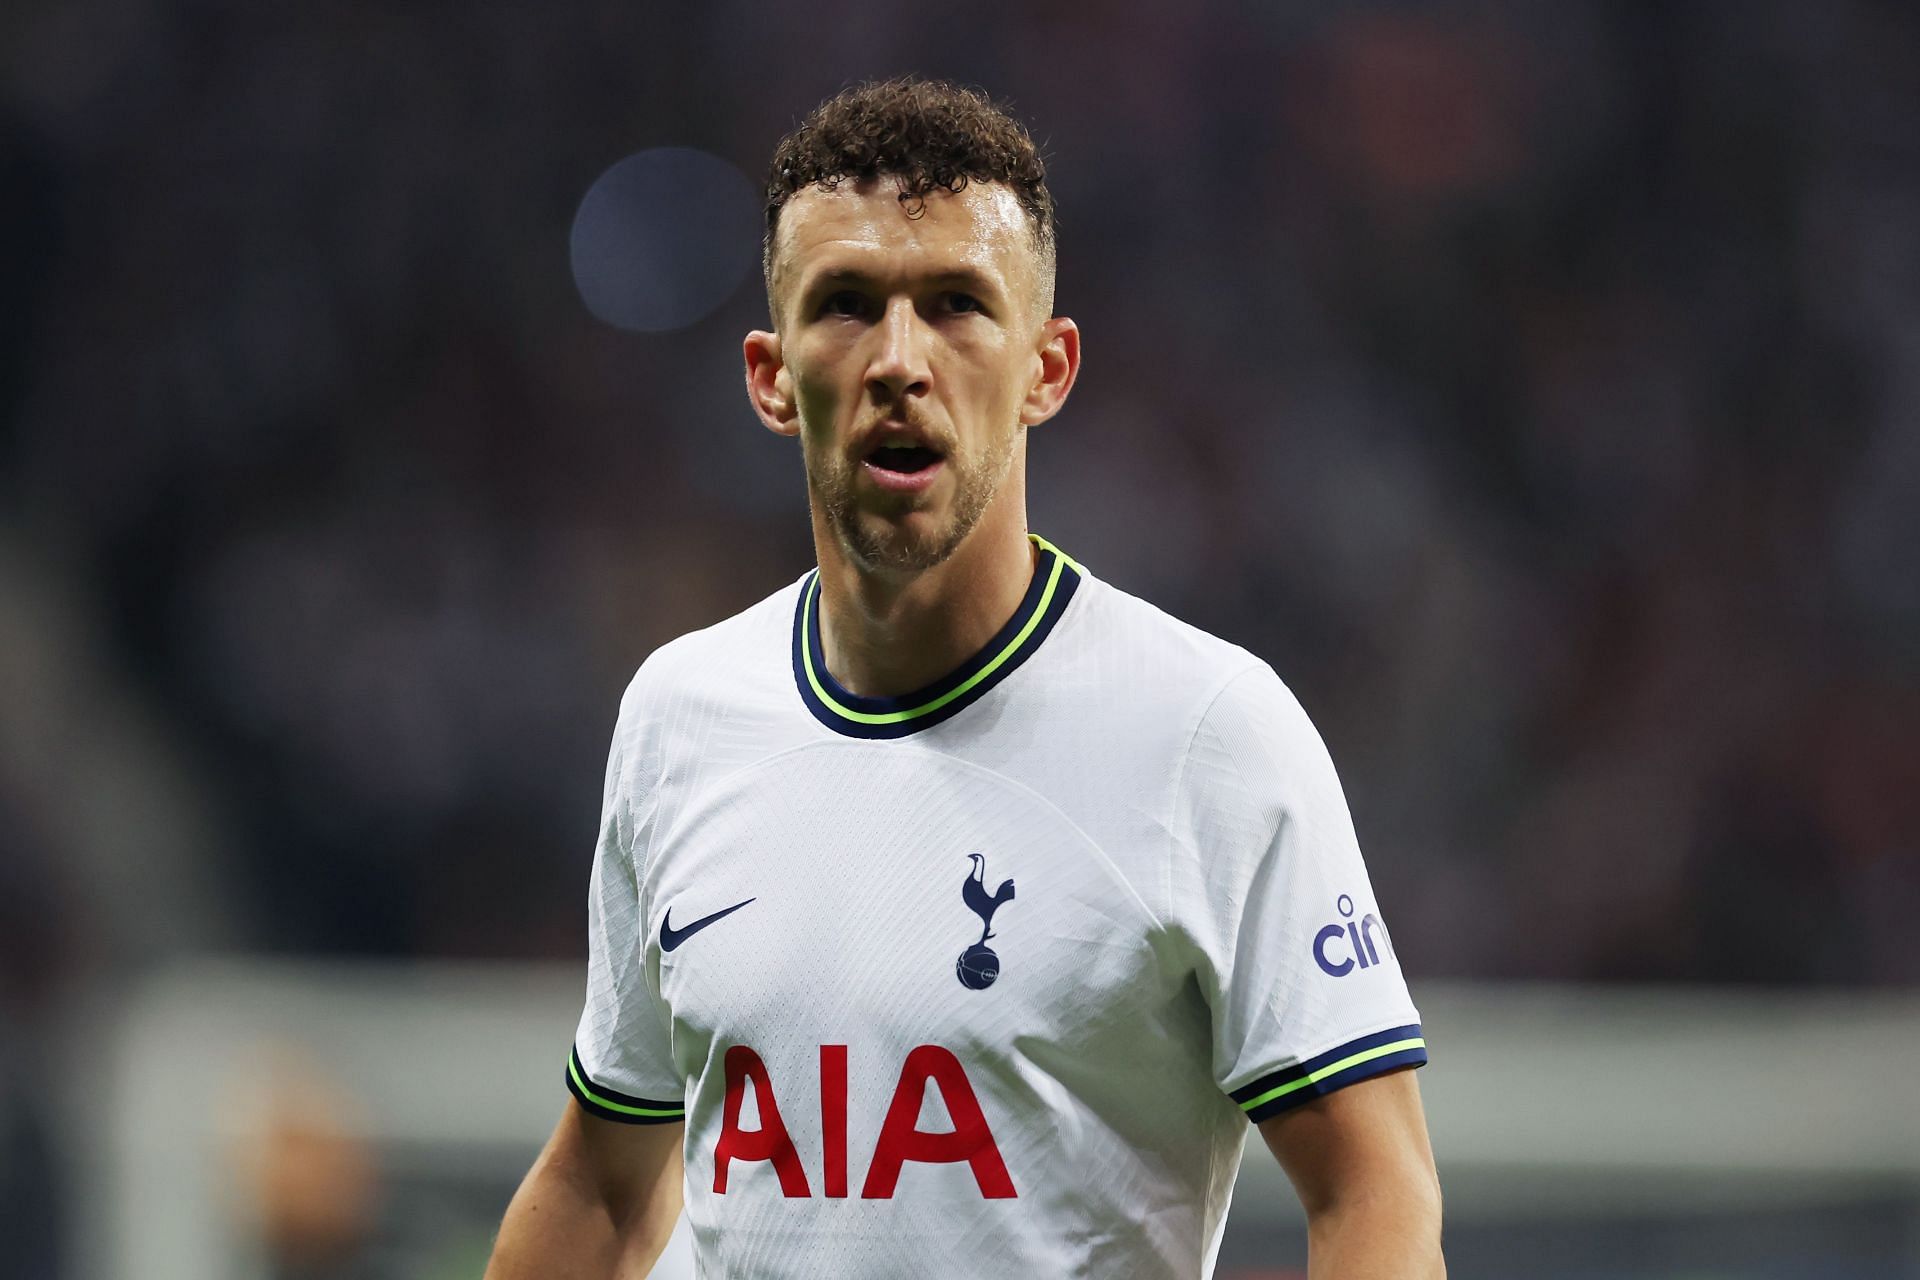 Perisic joined Spurs on a free transfer this summer